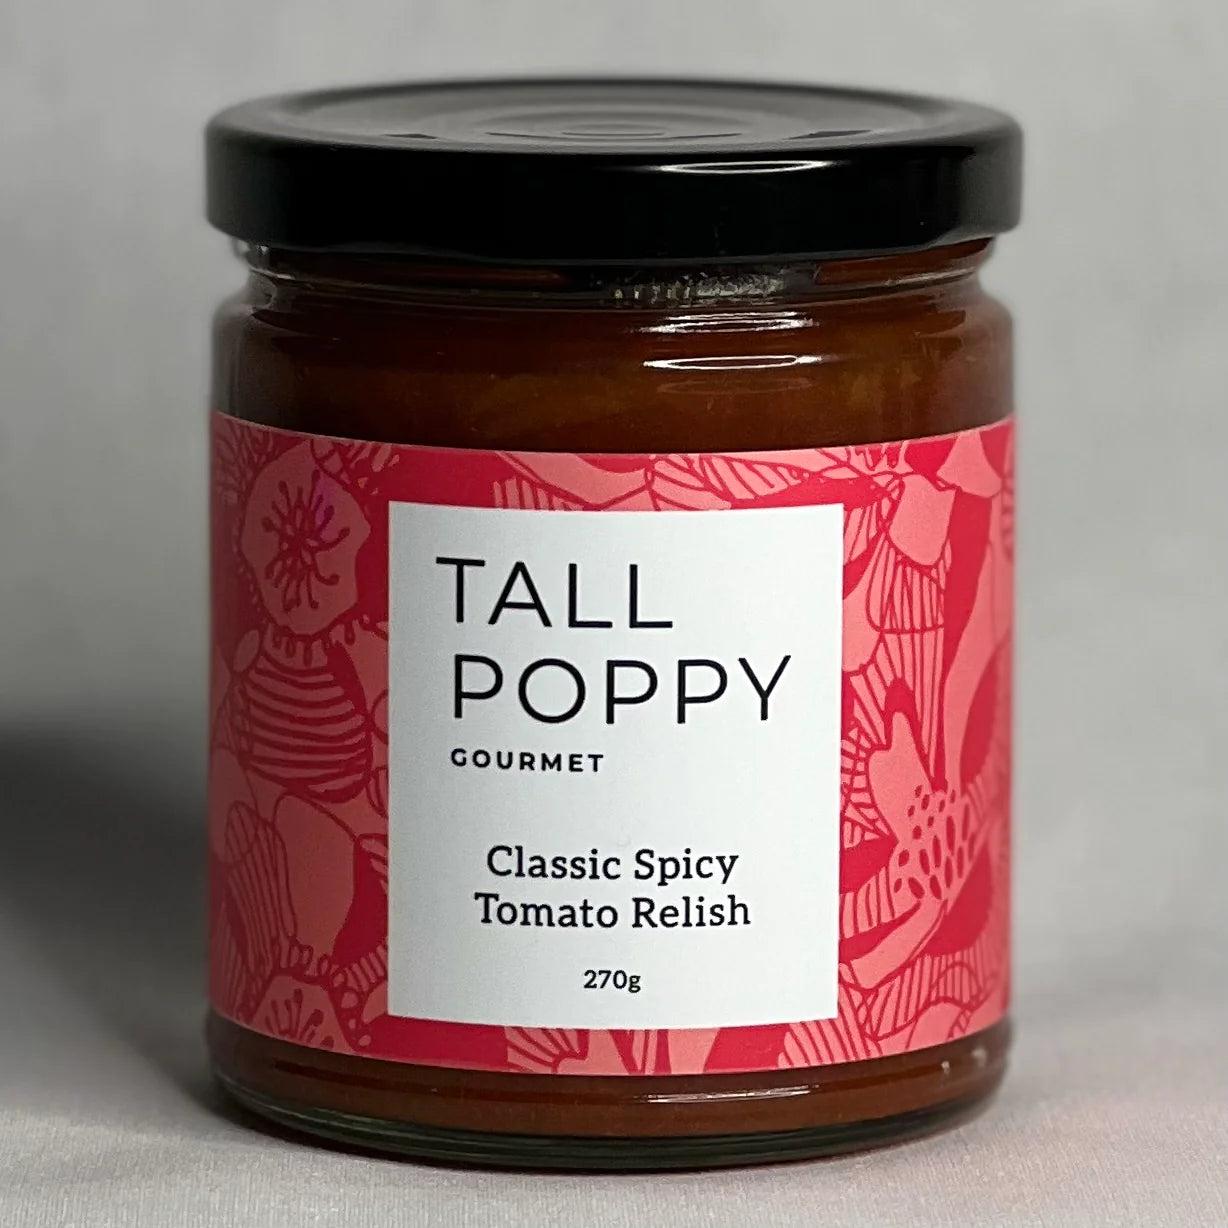 Tall Poppy Gourmet Classic Spicy Tomato Relish